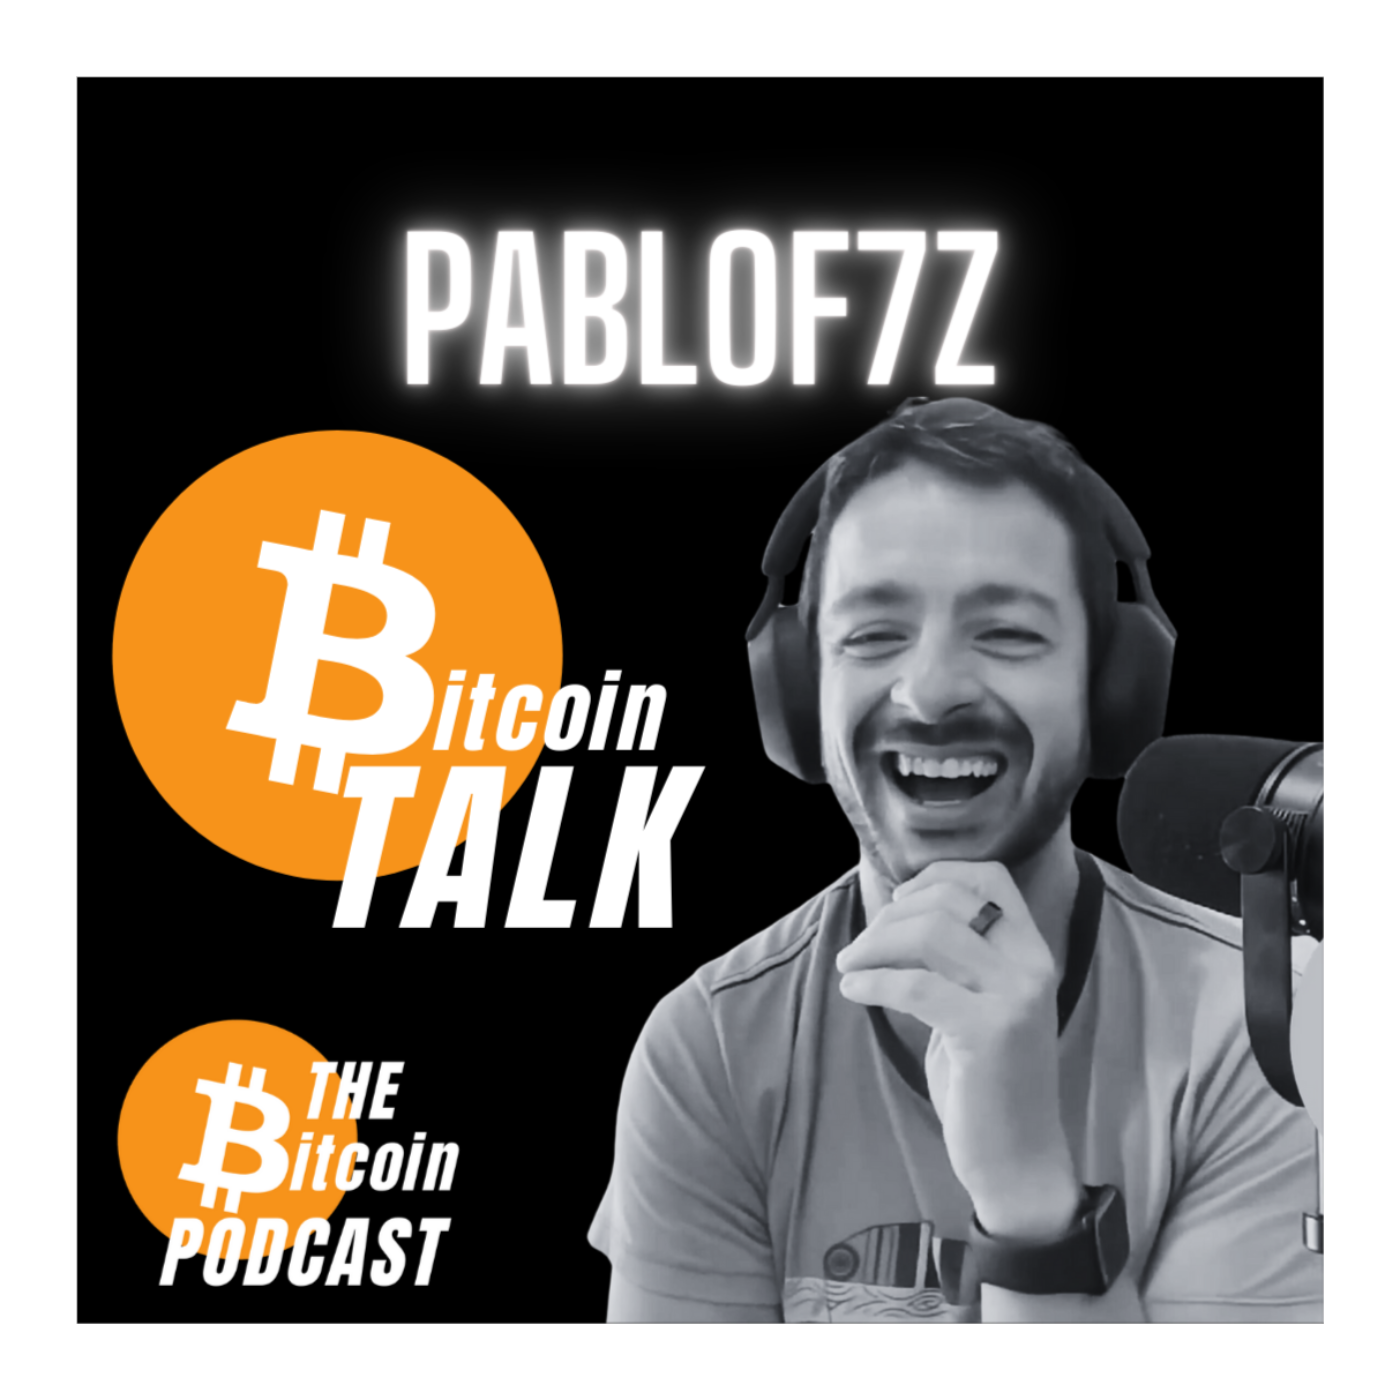 ESCAPING THE ALGORITHM WITH NOSTR - PabloF7Z (Bitcoin Talk on THE Bitcoin Podcast)